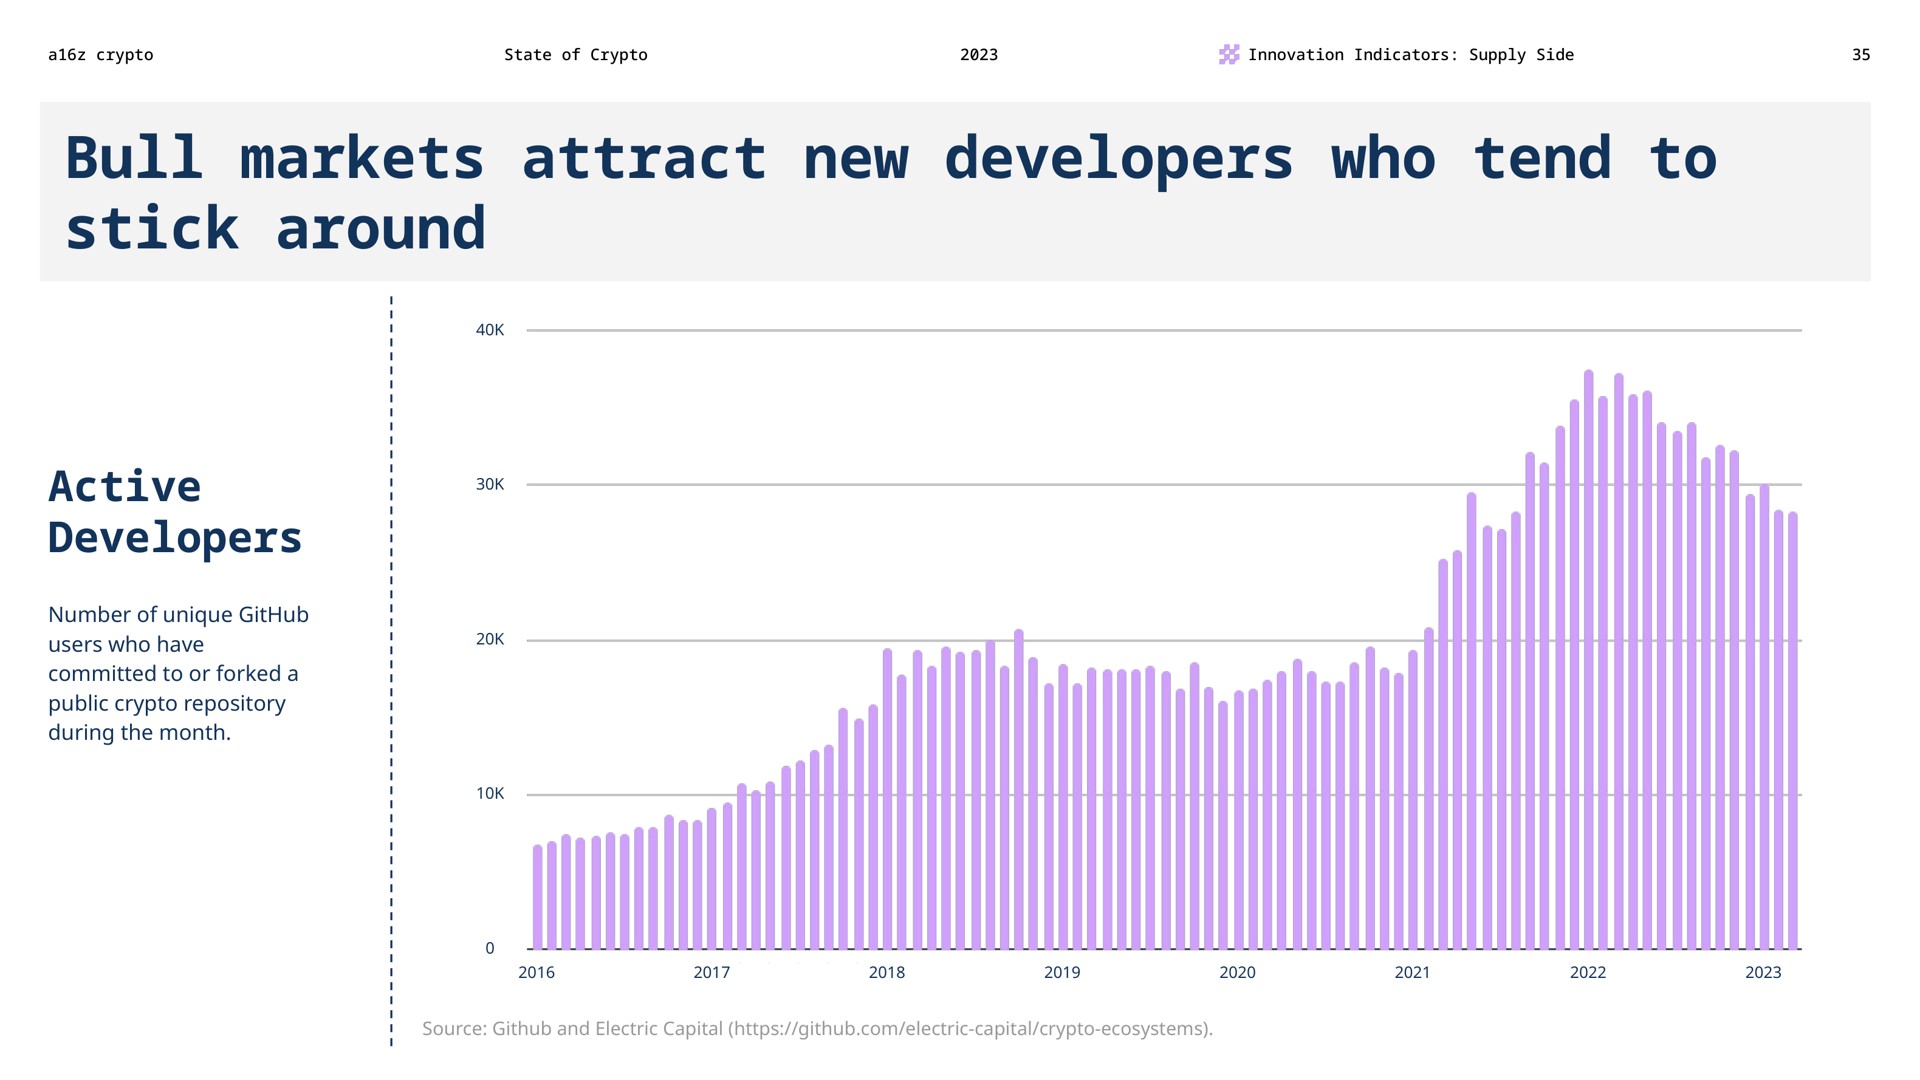 bull markets attract new developers who tend to stick around active developers | a16z